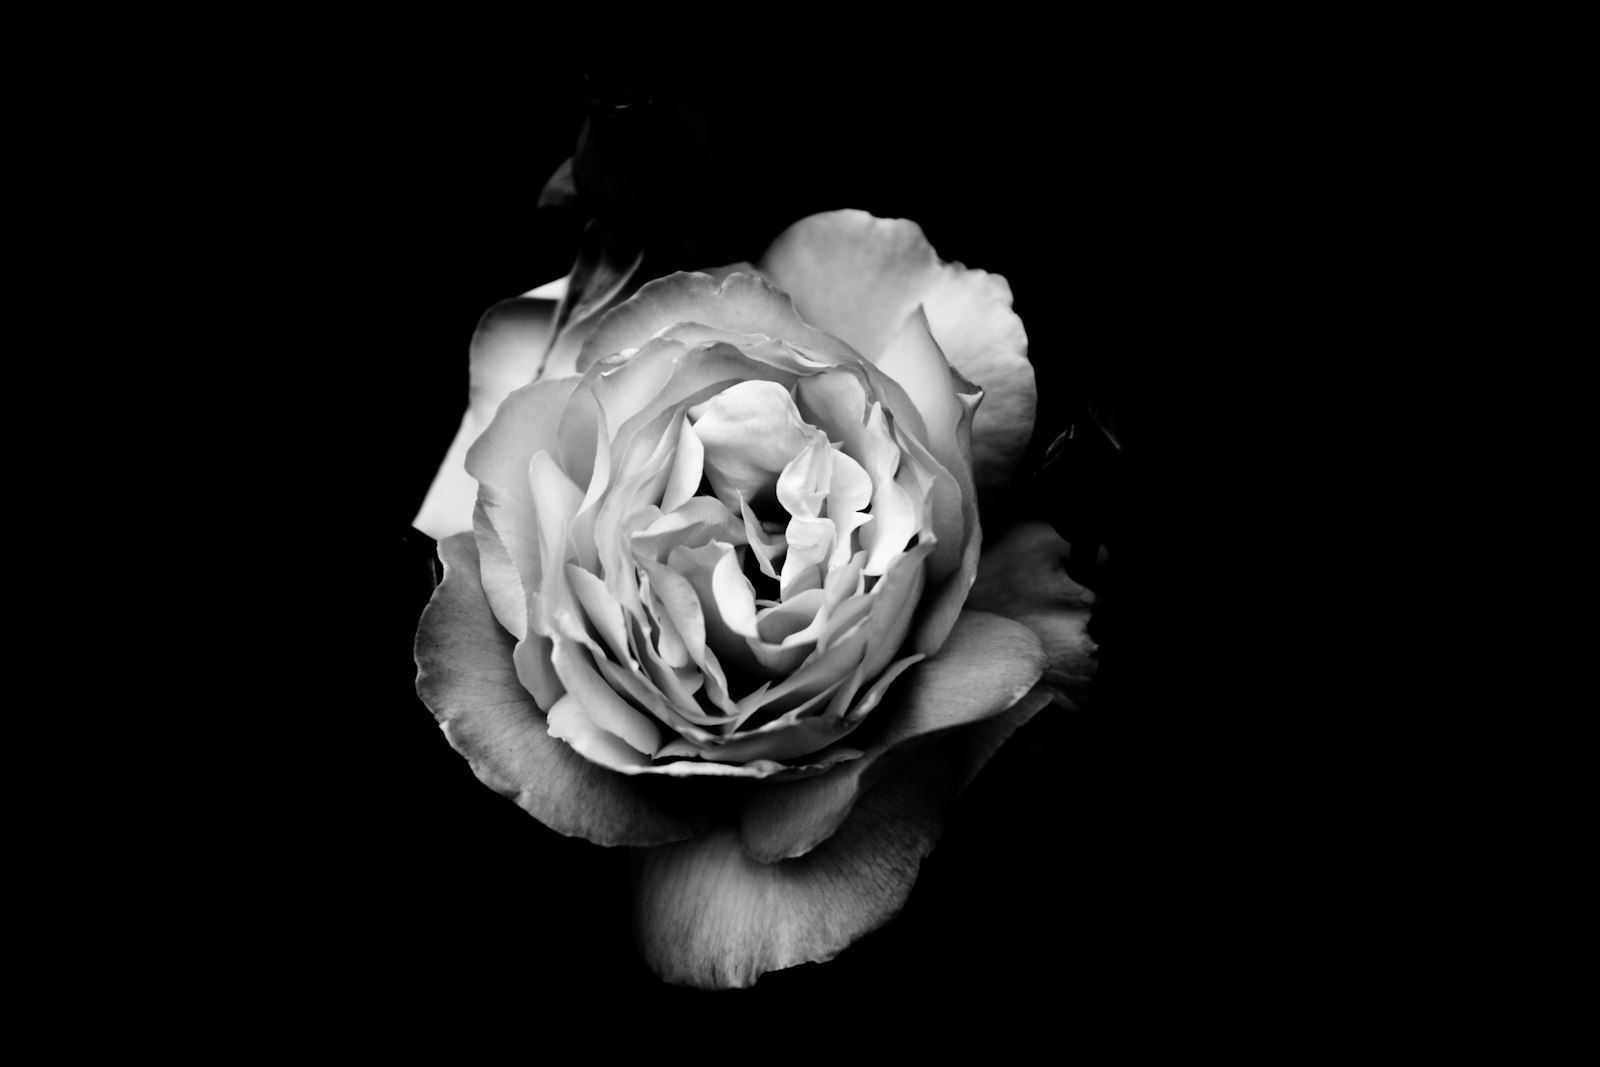 Fujifilm XF 35mm F2 R WR sample photo. Grayscale photograph of petaled photography